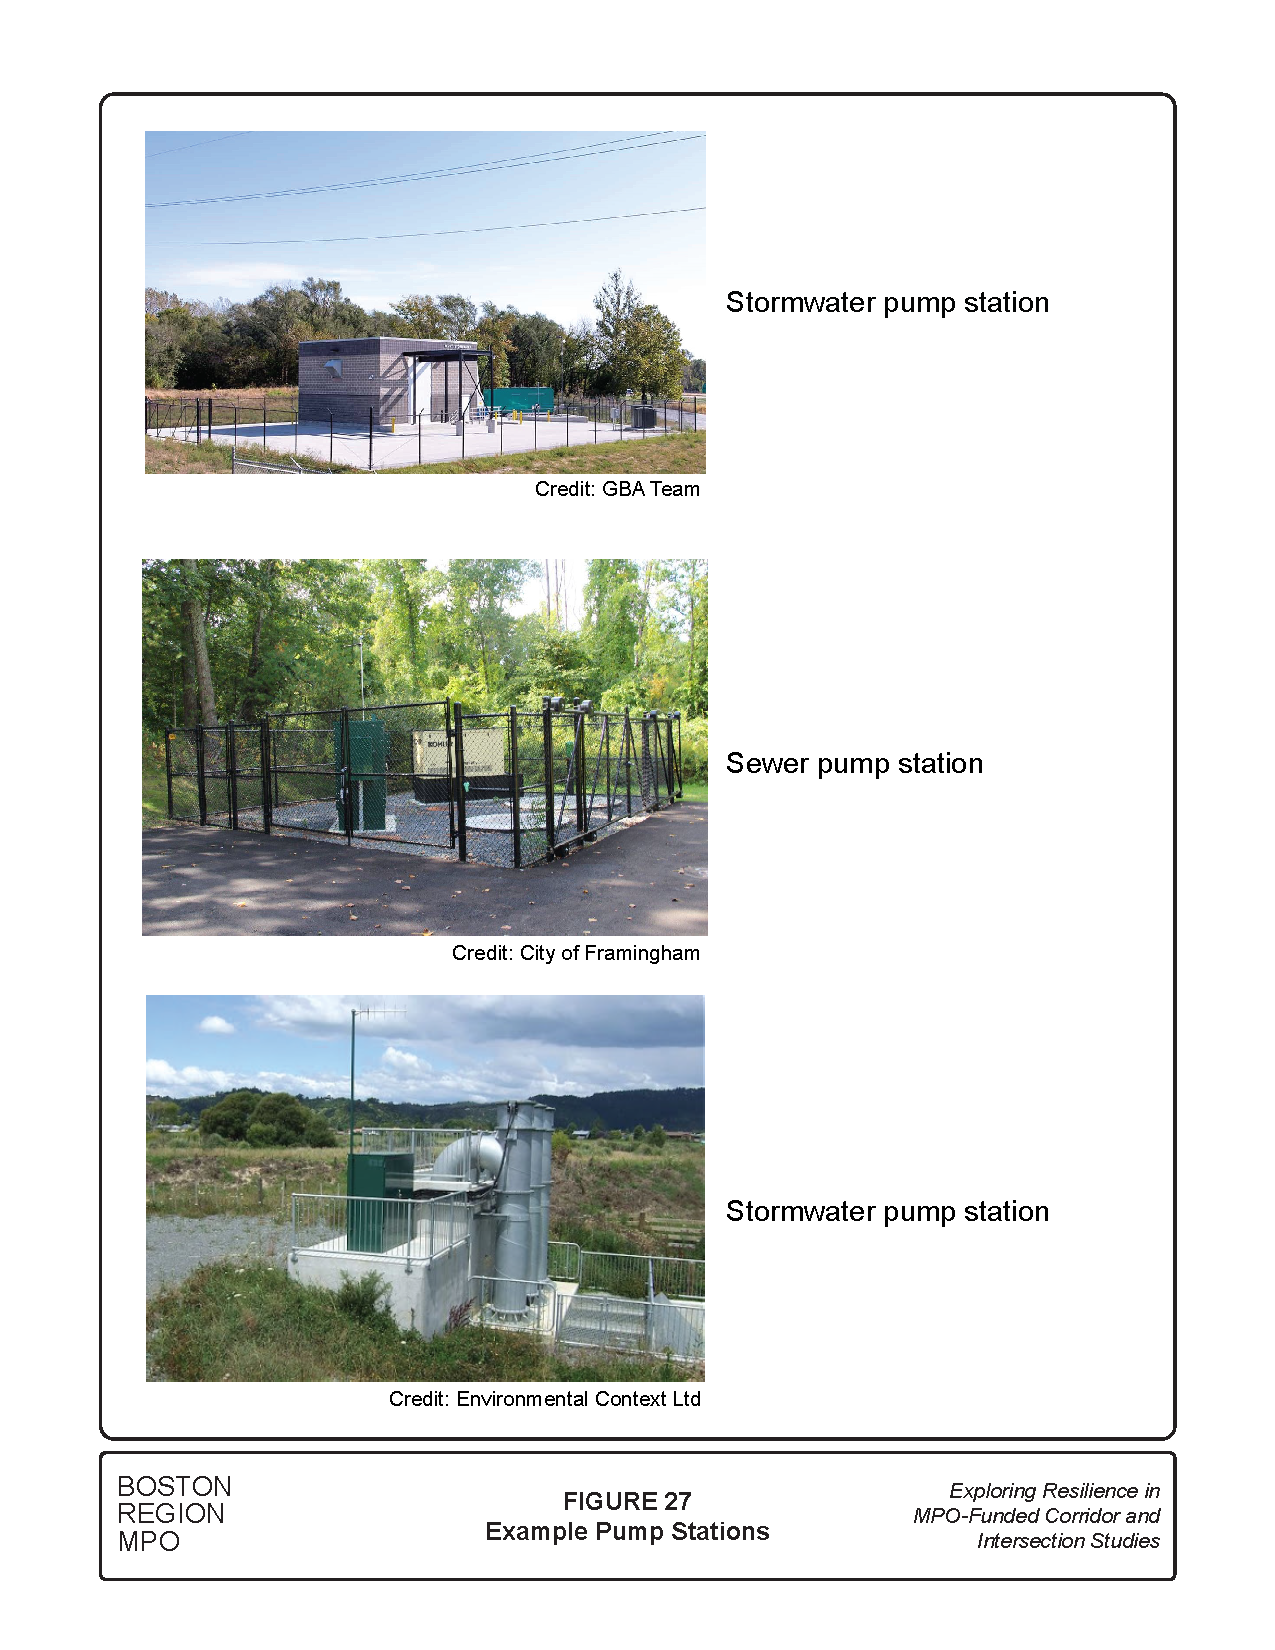 Figure 27 shows pictures of pump stations.